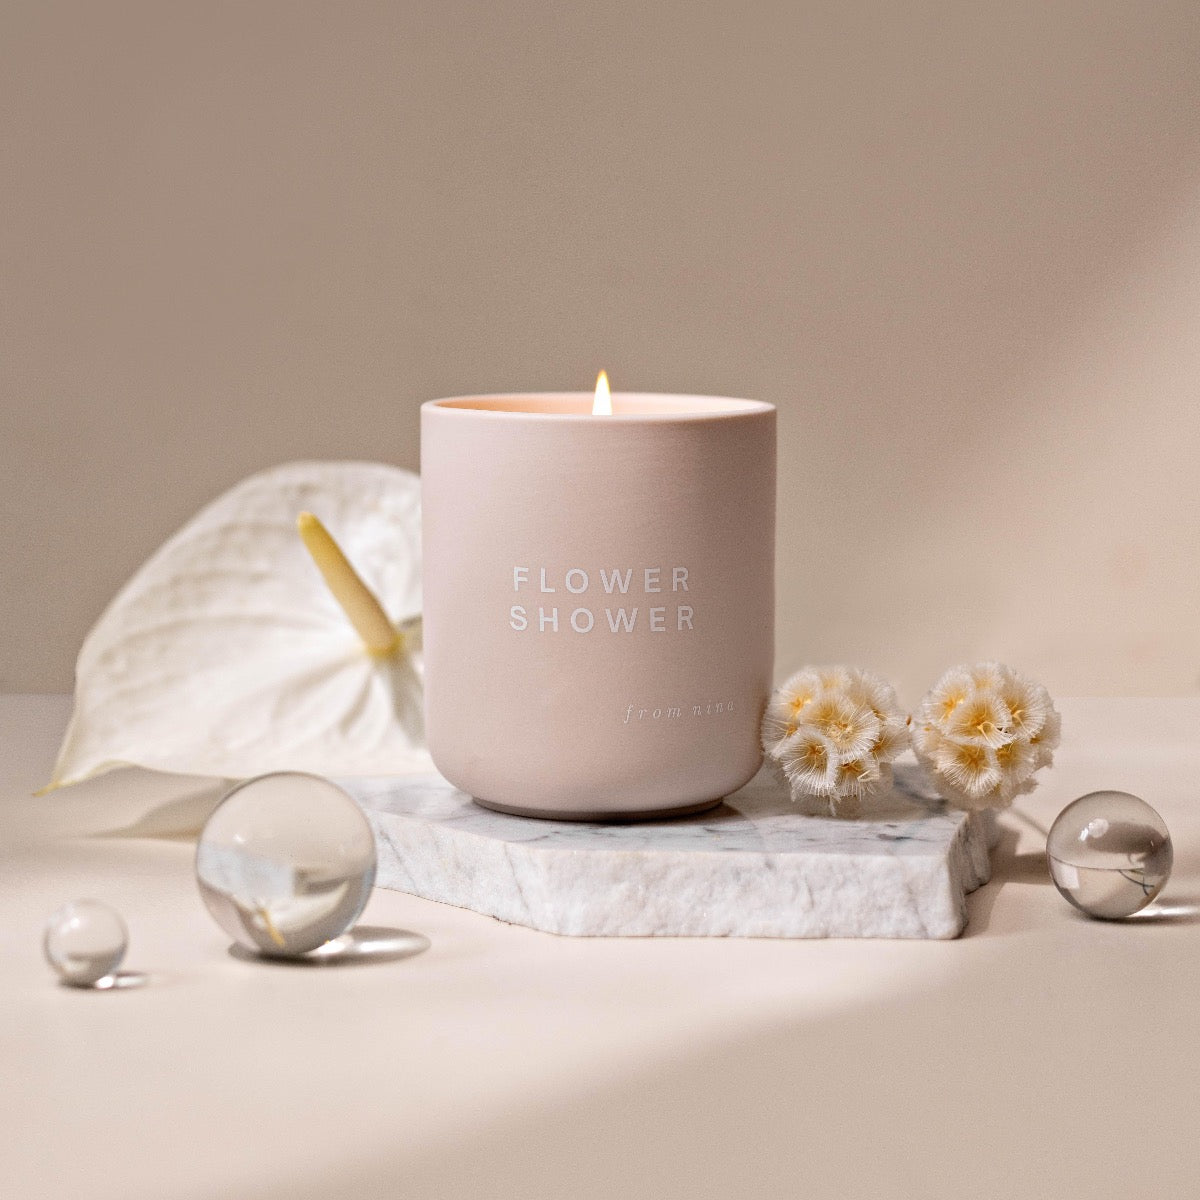 From Nina-Flower Shower Perfumed Candle 310g